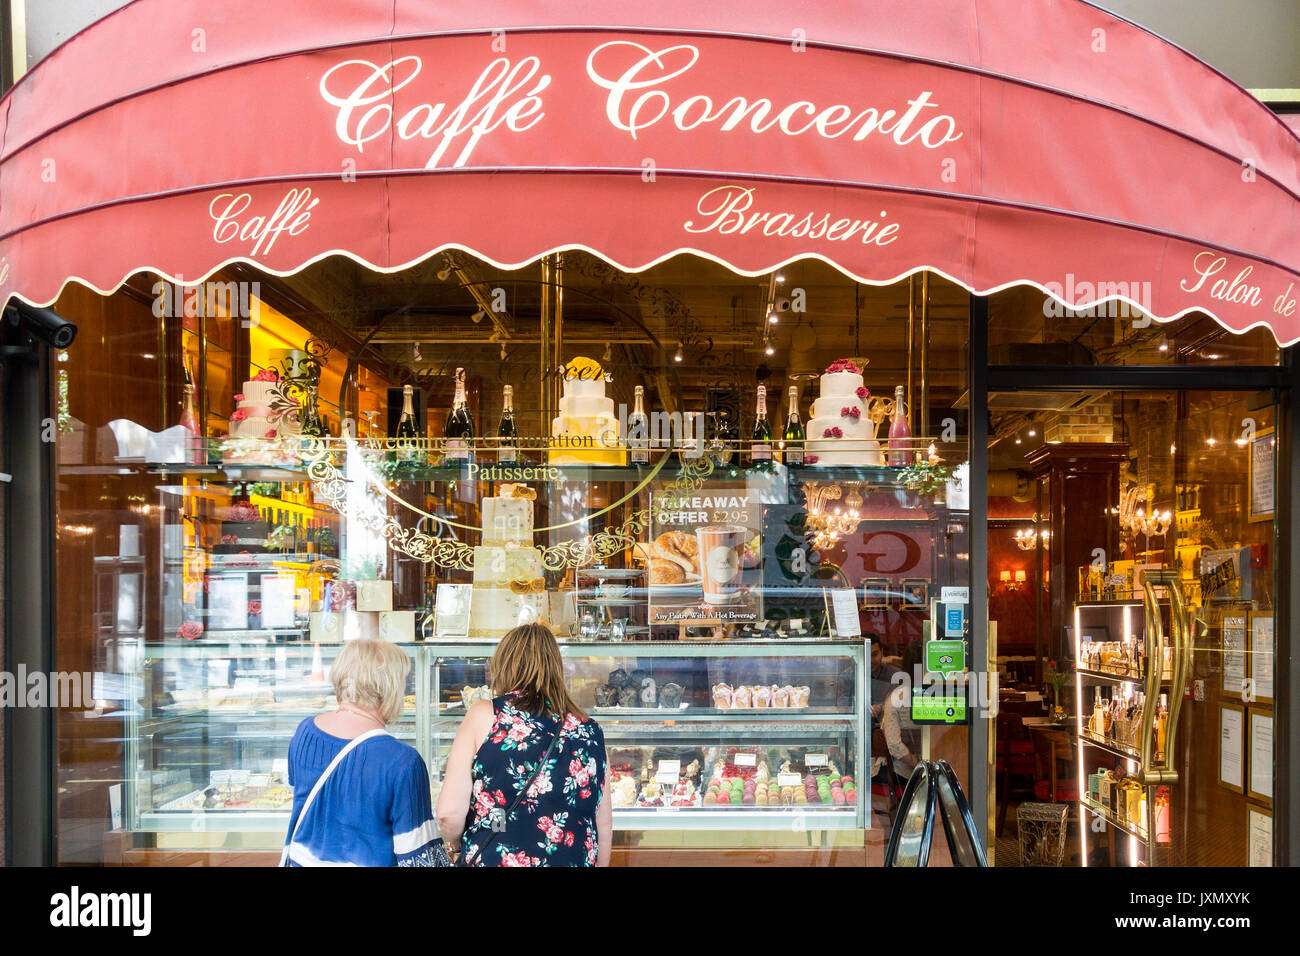 Two women perusing,, looking in the window of the Caffe Concerto, 4-5 Northumberland Ave, Westminster, London WC2N 5BW, UK Stock Photo